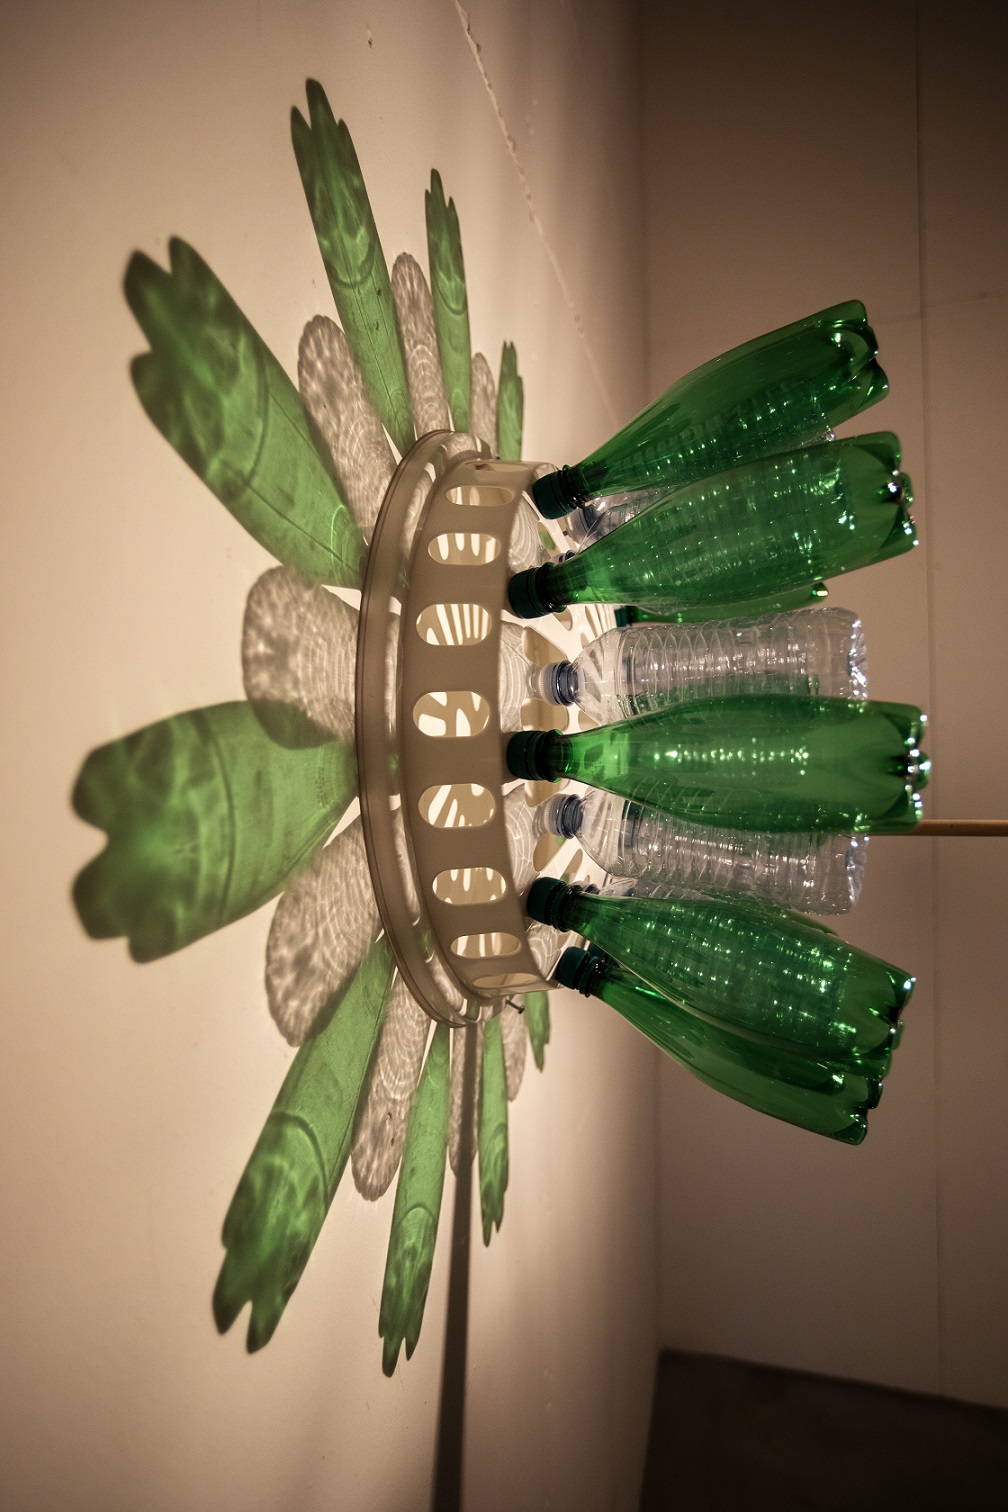 Green and clear plastic bottles mounted upright on a laundry basket lid. The light in the room is aimed at the lid, which is mounted against a white wall where the bottles create a mandala pattern against the wall.